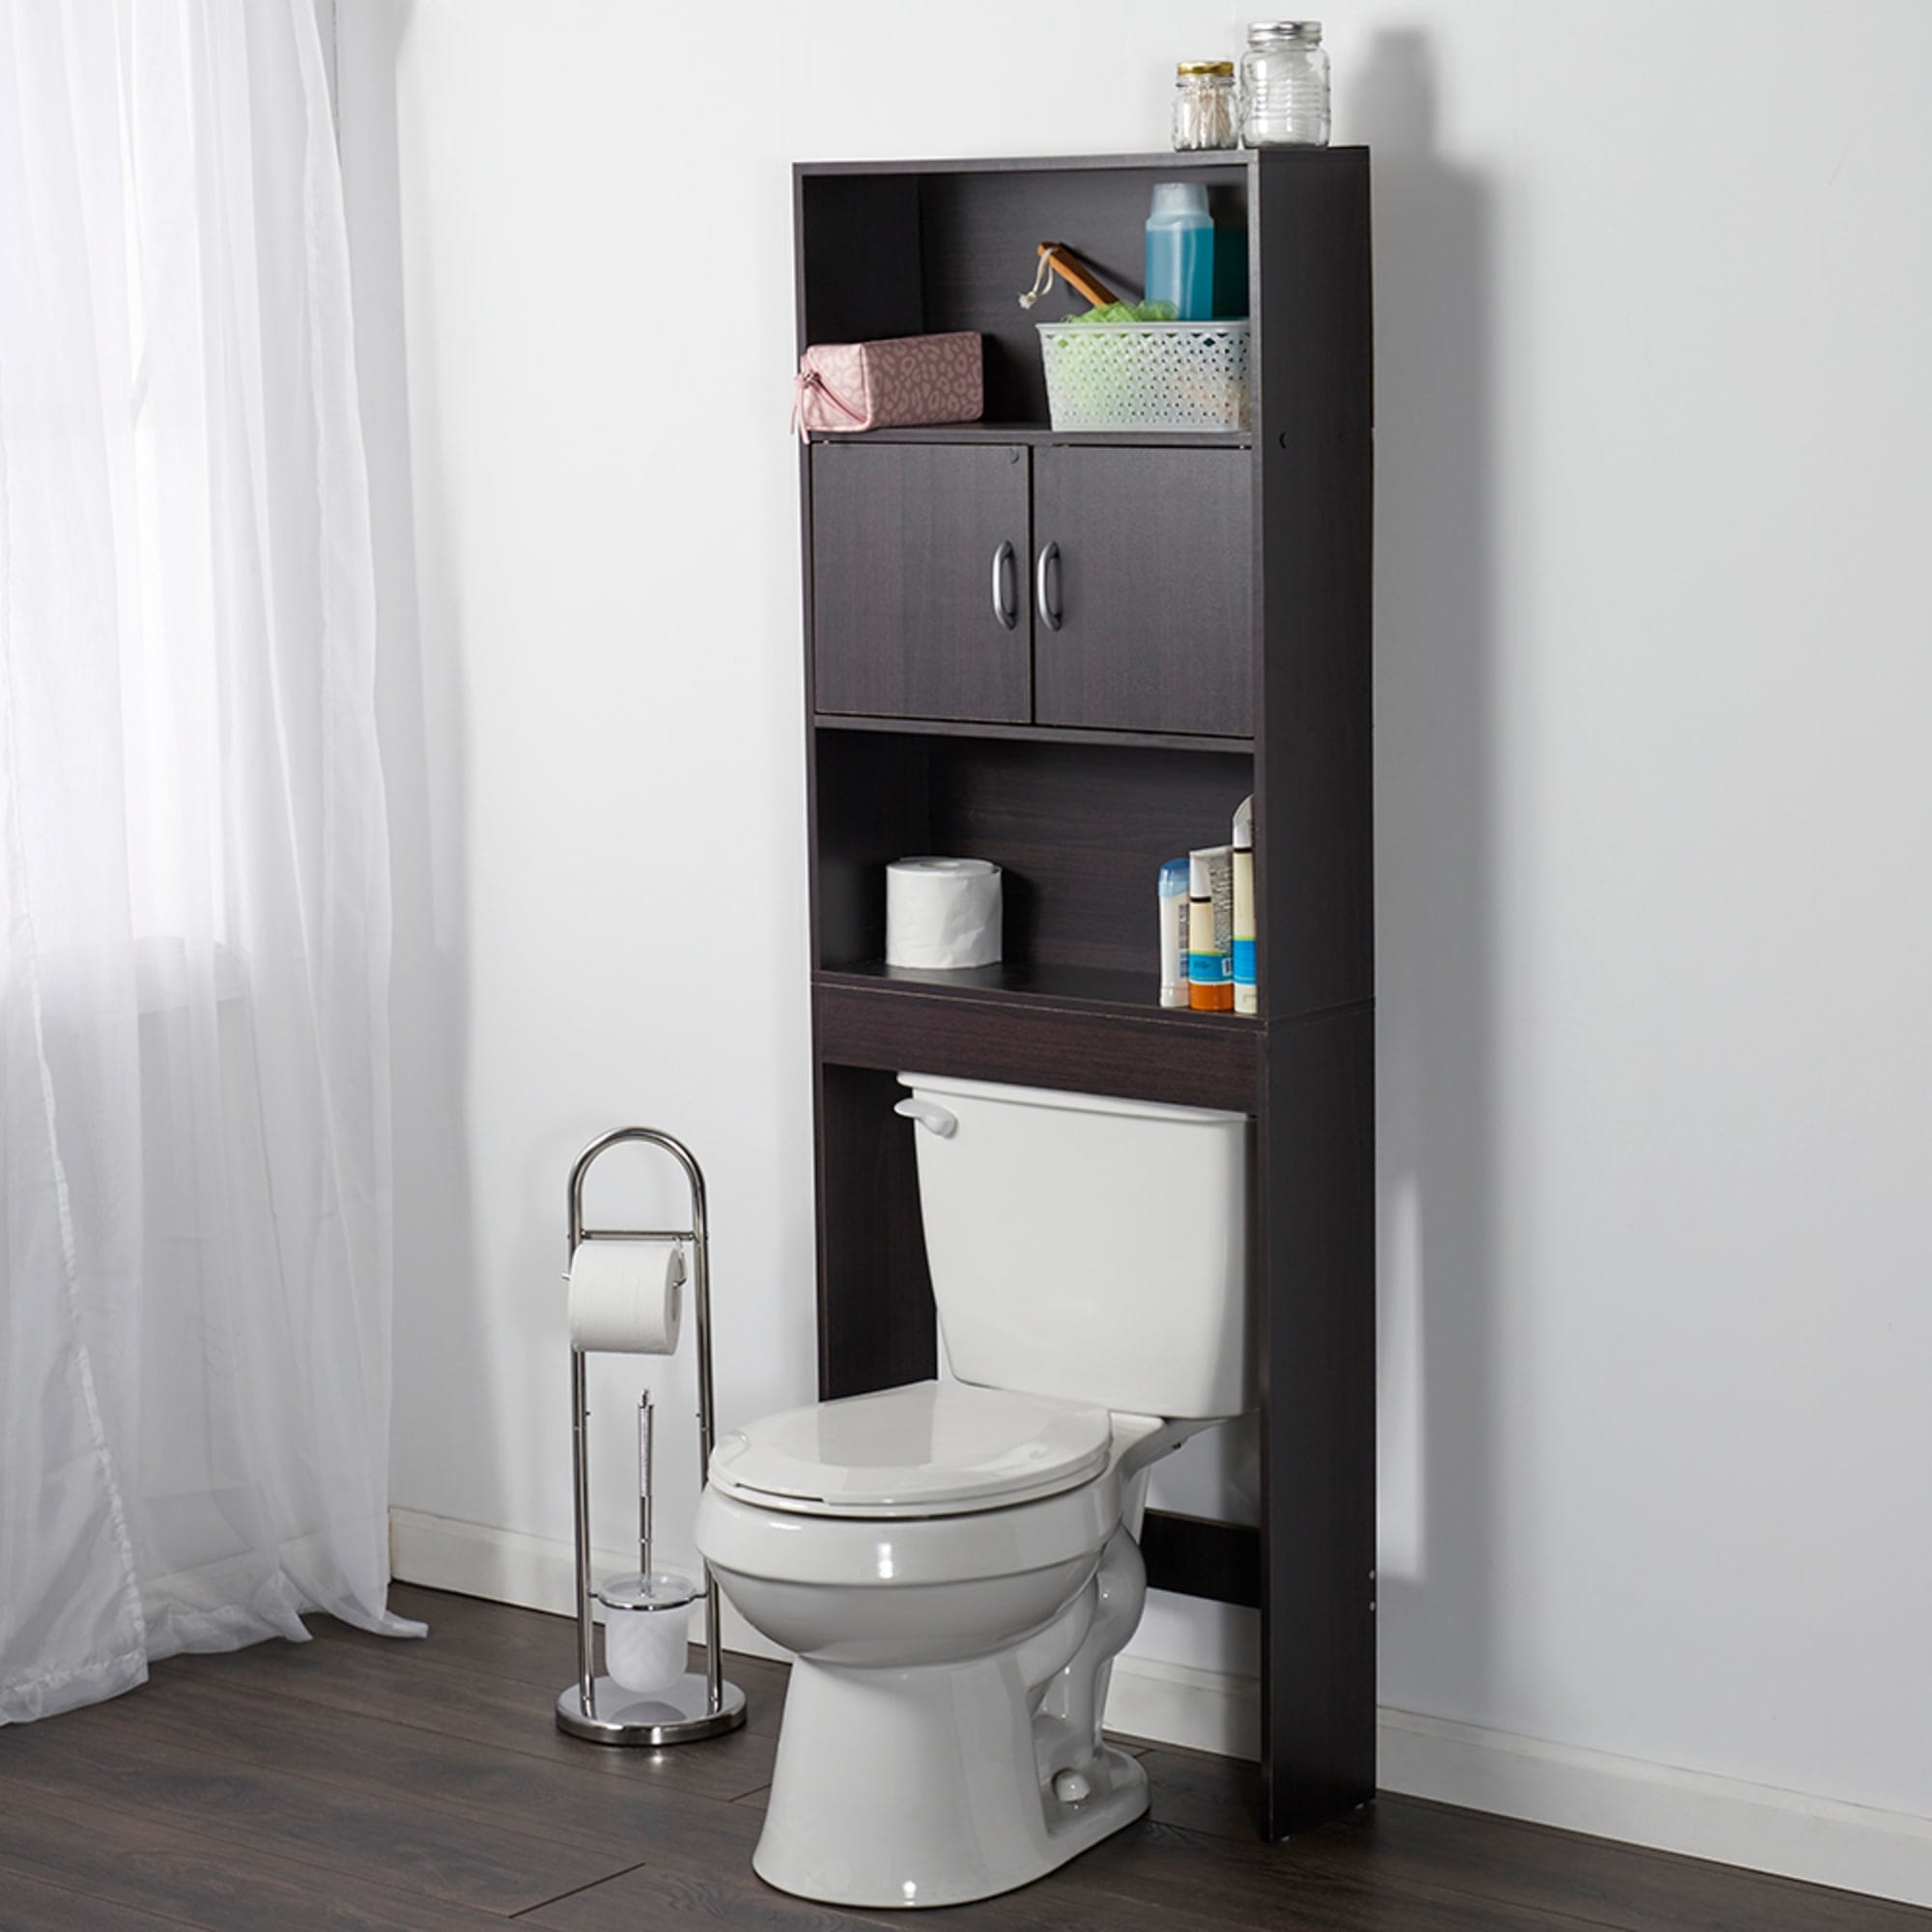 Home Basics (Grey) 3 Tier Wood Space Saver Over The Toilet Bathroom Shelf with Open Shelving and Cabinets